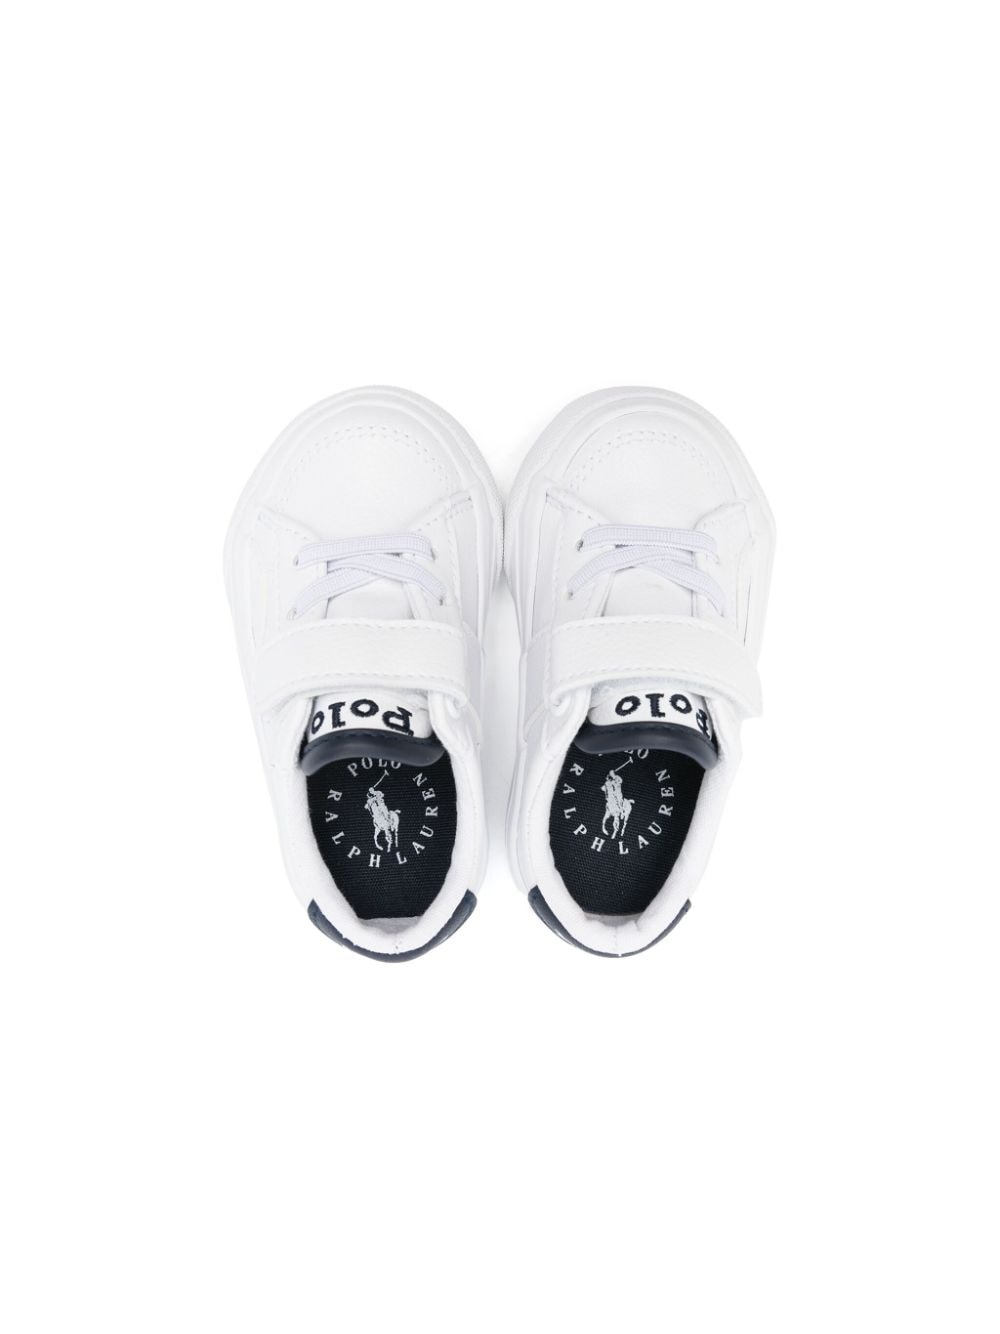 White sneakers for newborns with logo